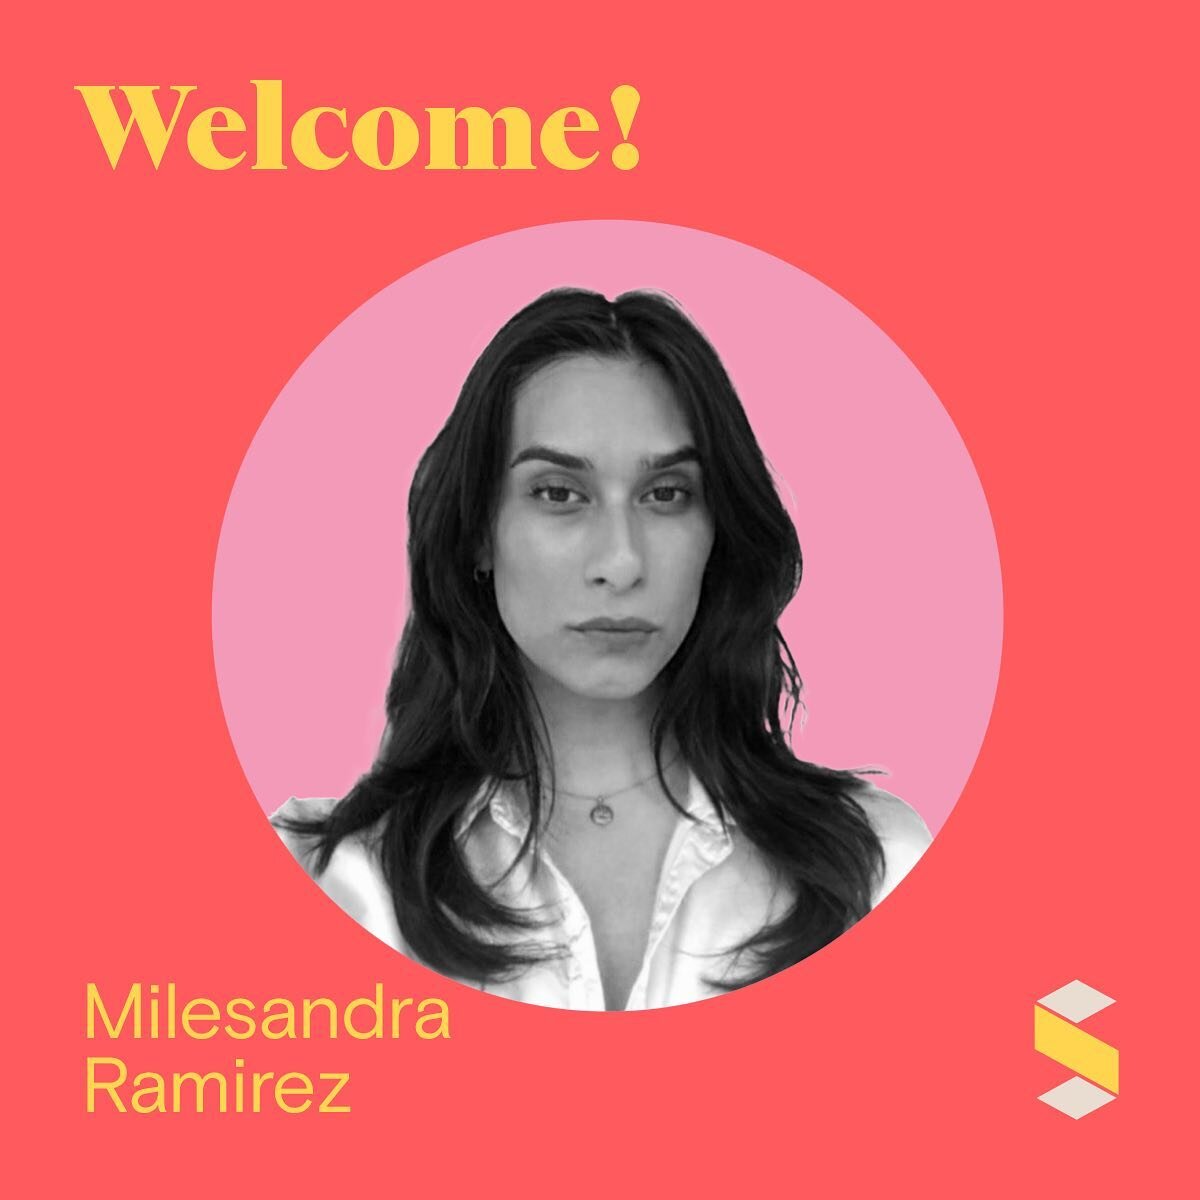 Everyone please welcome our newest Strategist, Milesandra!! 

Milesandra is an active member of a trans mutual aid organization and is a founding member of a 501c3 Non-profit media board! Originally from Texas, Milesandra has considered herself a New